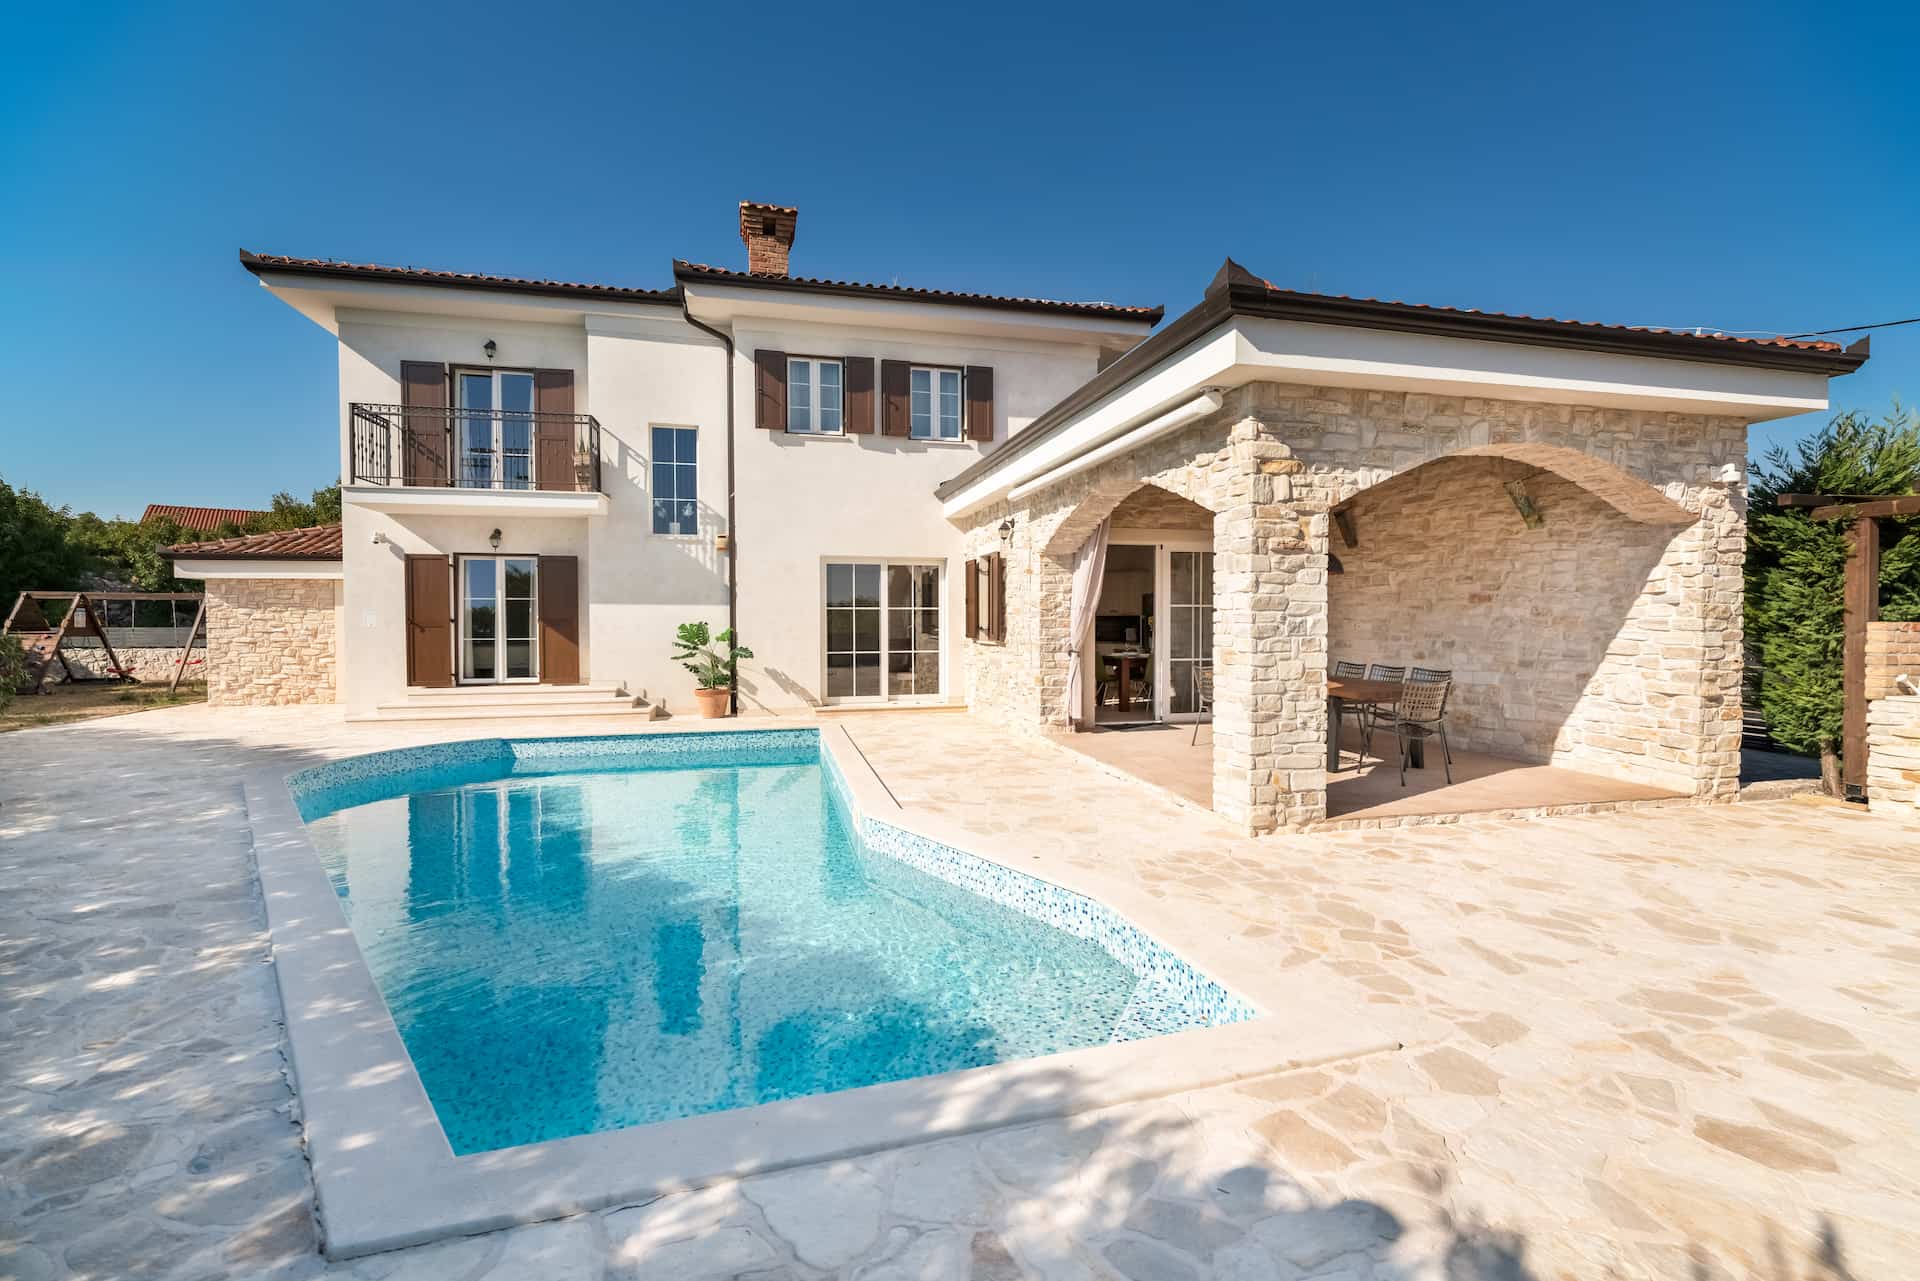 A romantic villa with a heated swimming pool and large garden